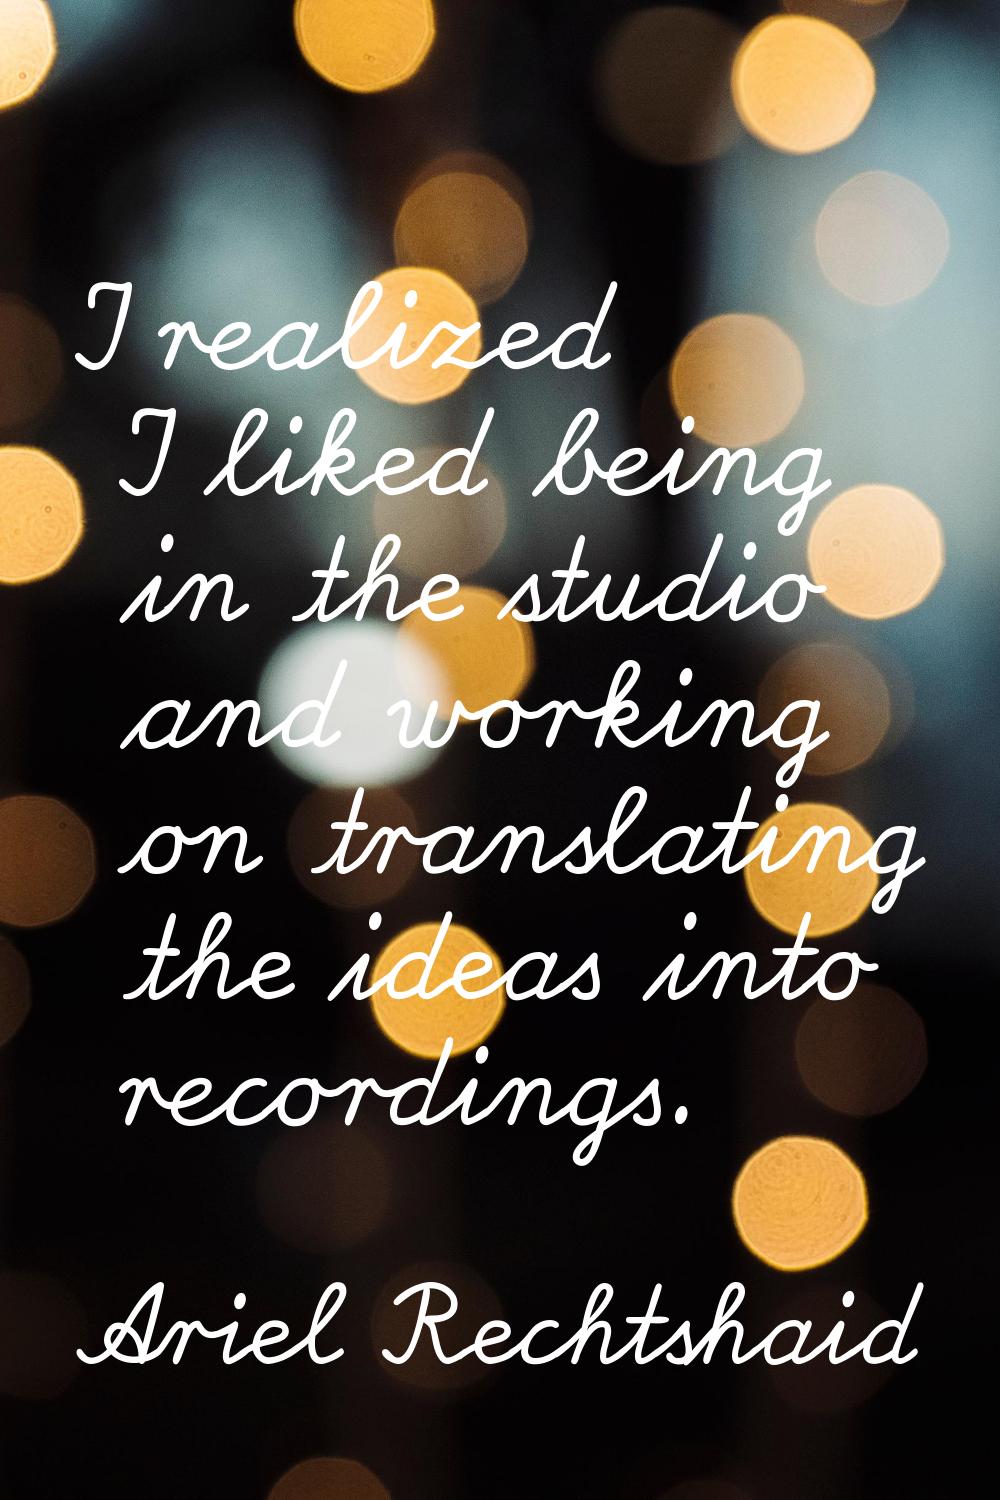 I realized I liked being in the studio and working on translating the ideas into recordings.